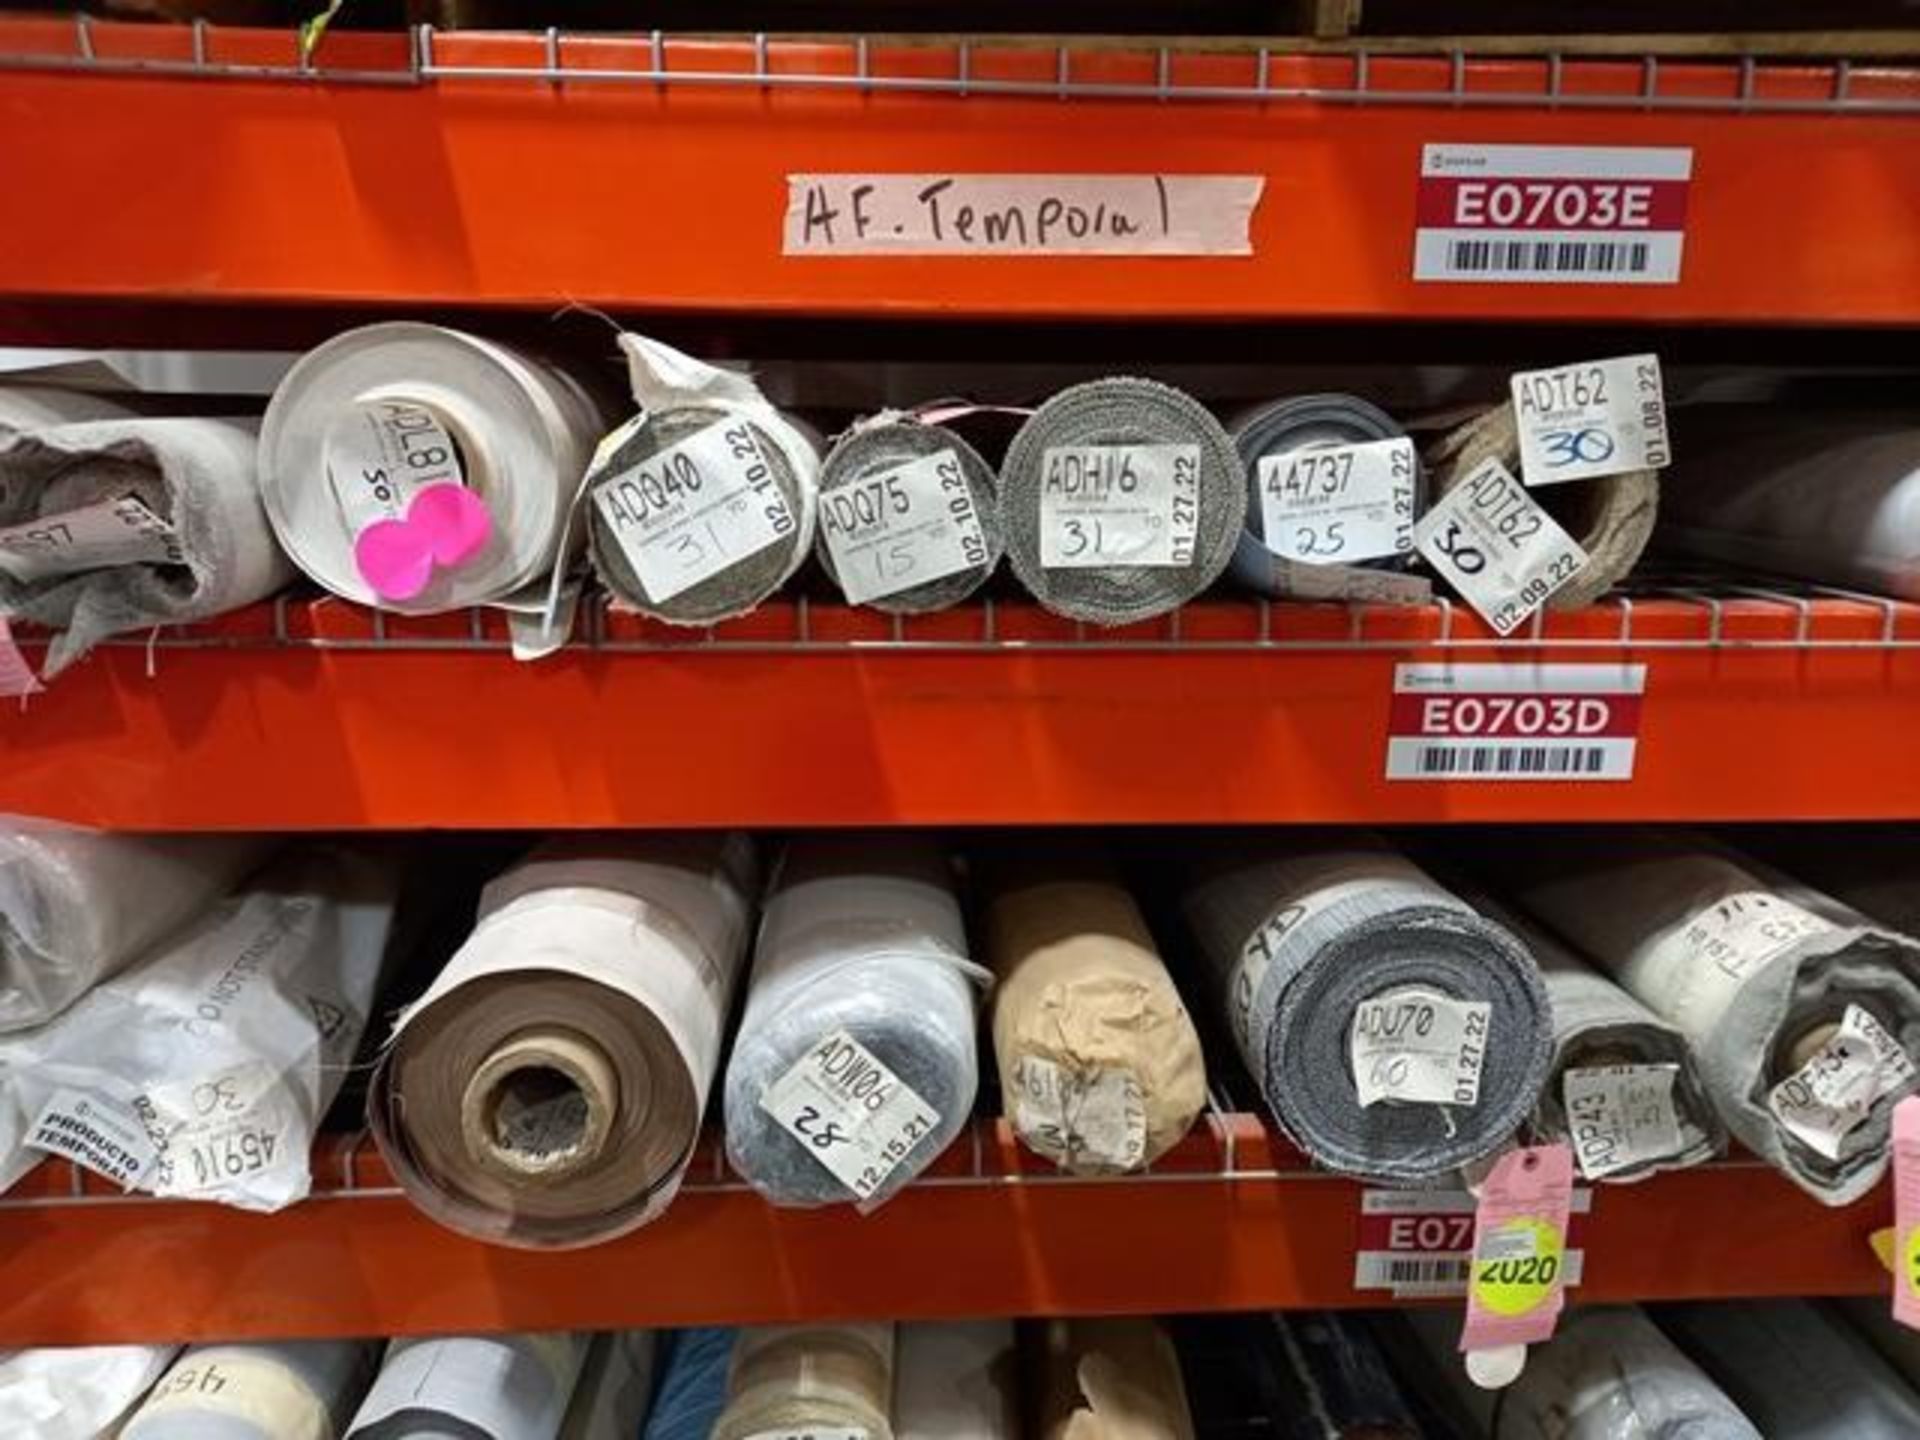 LOT: Approximately (7200) Yds Of Fabric For Upholstery, Which Includes Fabrics Of Different Types( - Image 2 of 4